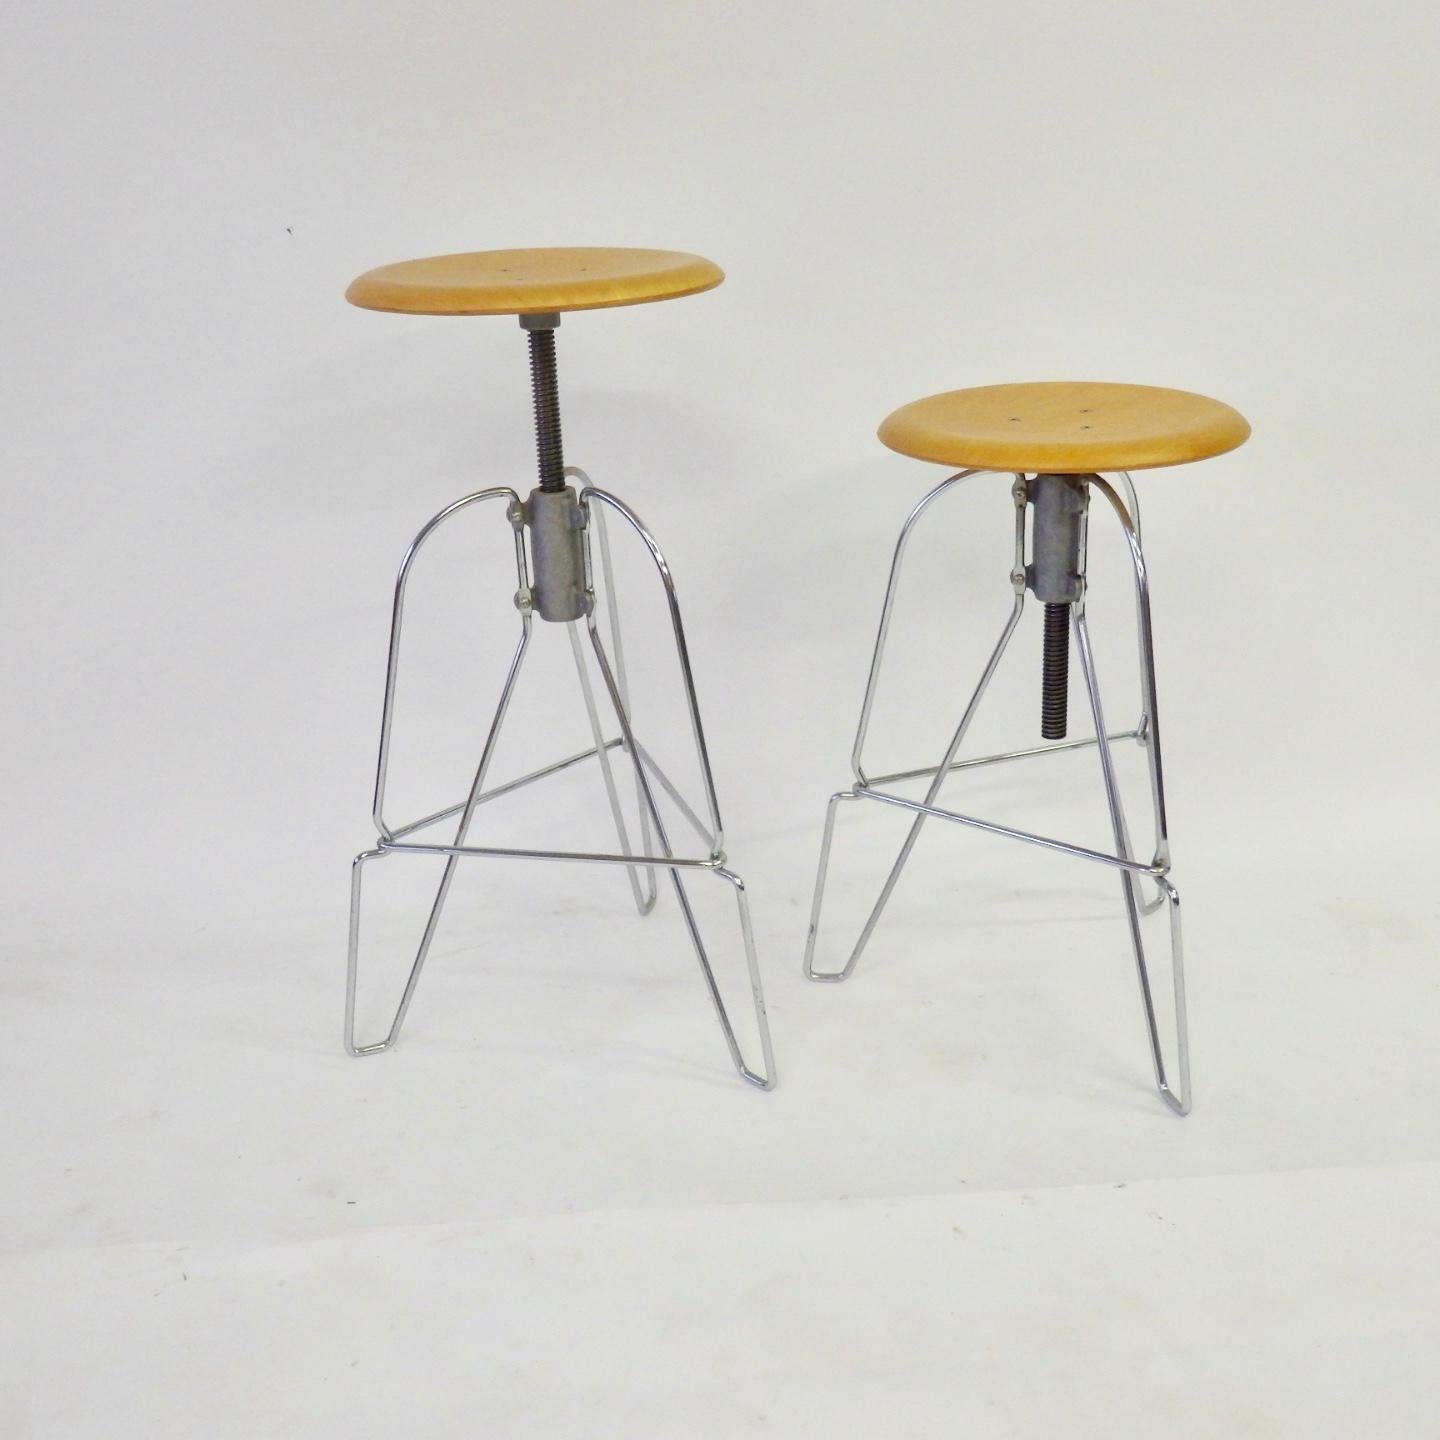 20th Century Pair of Industrial Chic Steel and Wood Adjustable Bar Stools